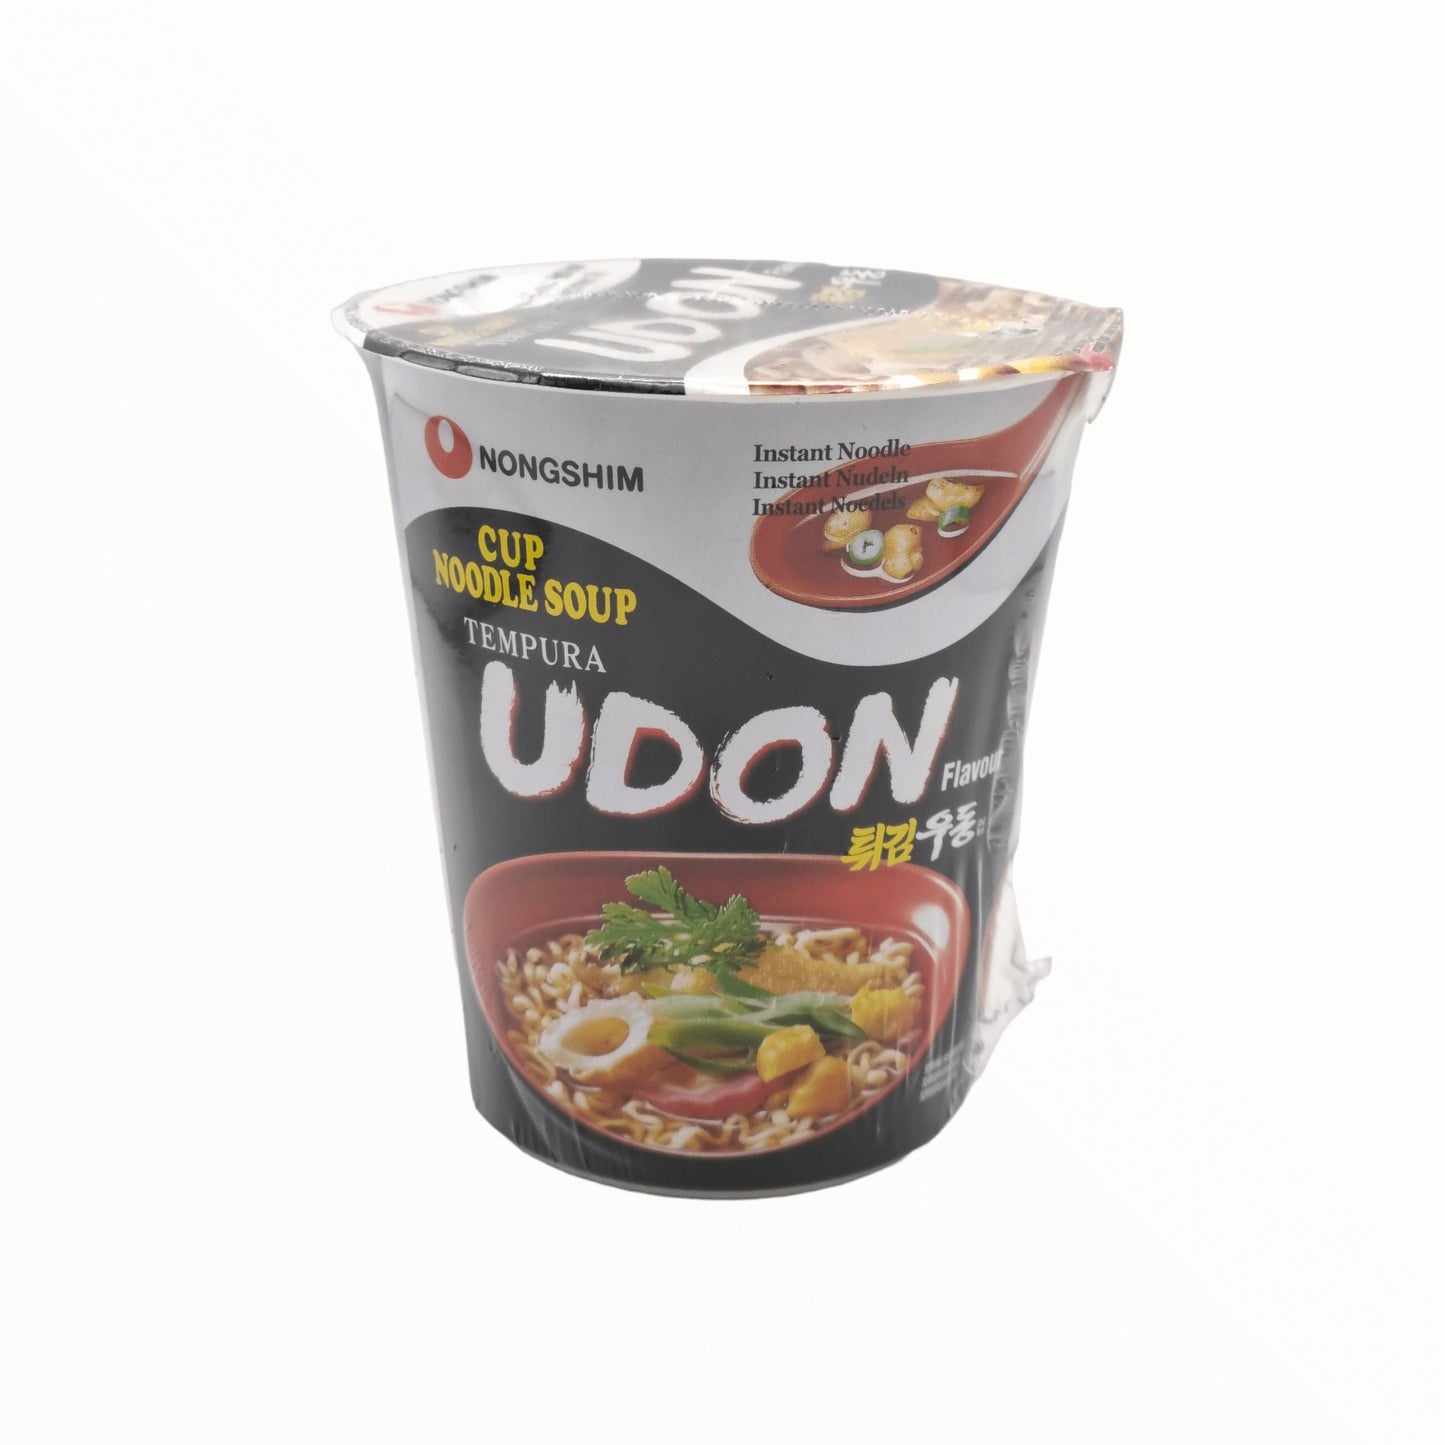 Cup Nudelsuppe Udon 62g - Mabuhay Pinoy Asia Shop